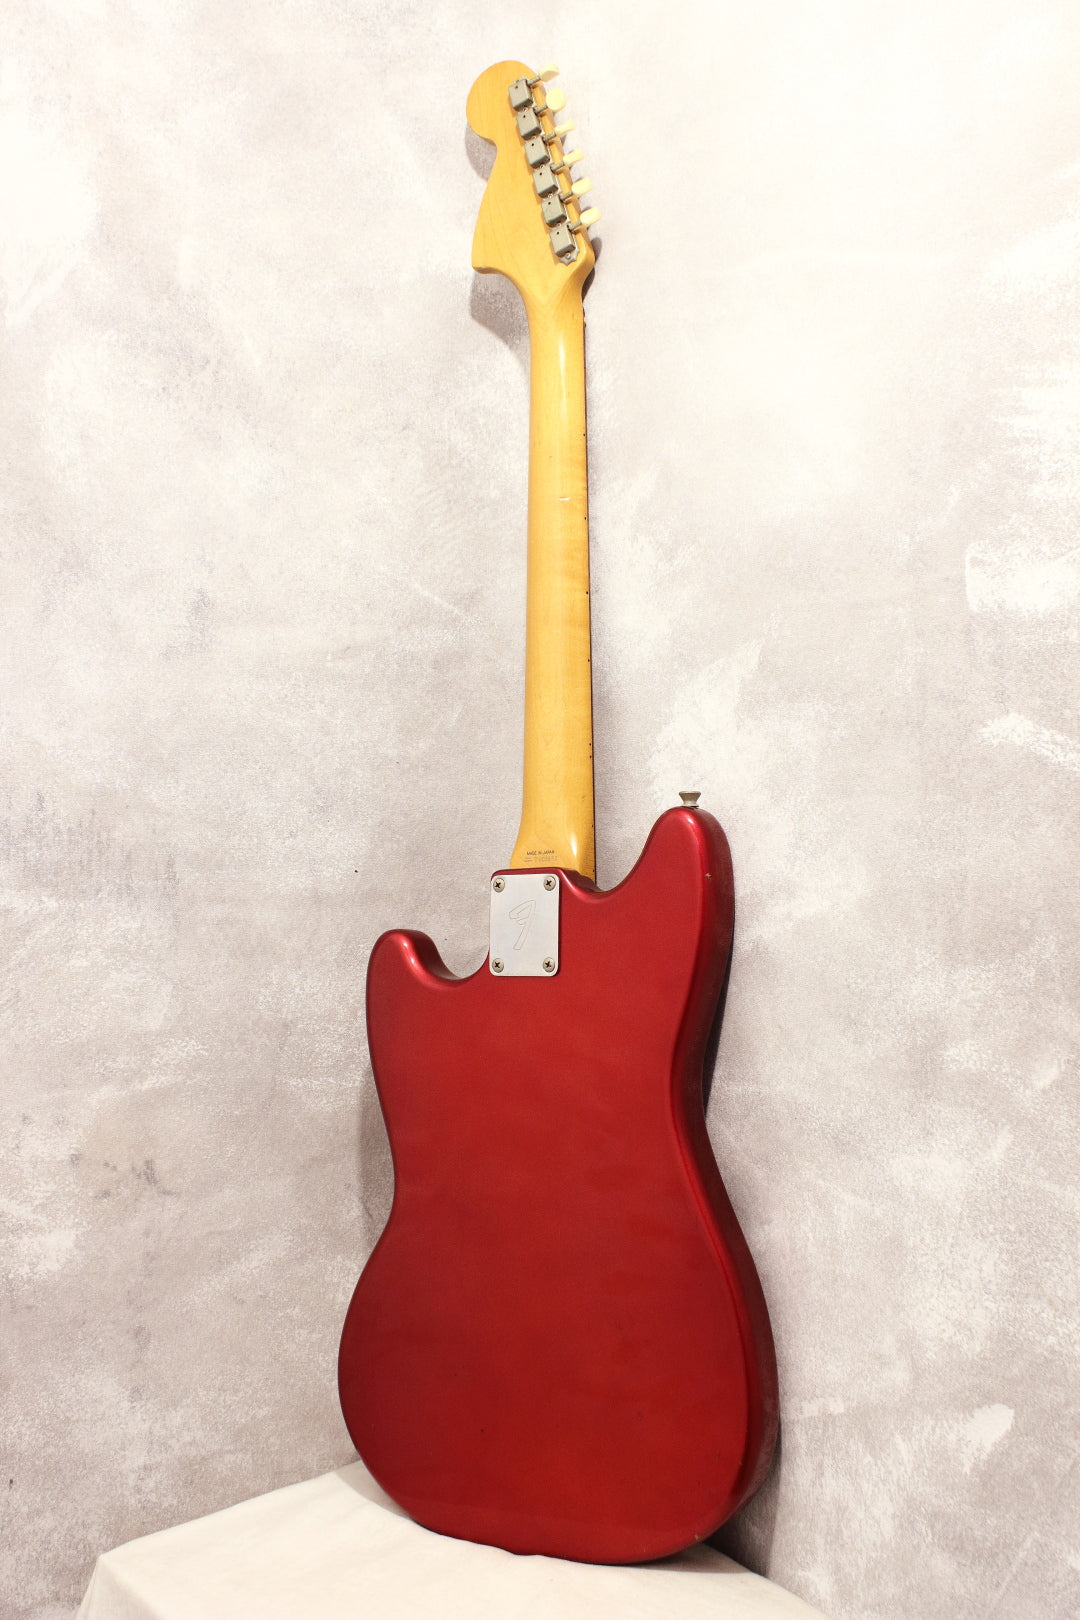 Fender Japan '66 Mustang MG66-65 Candy Apple Red 1996